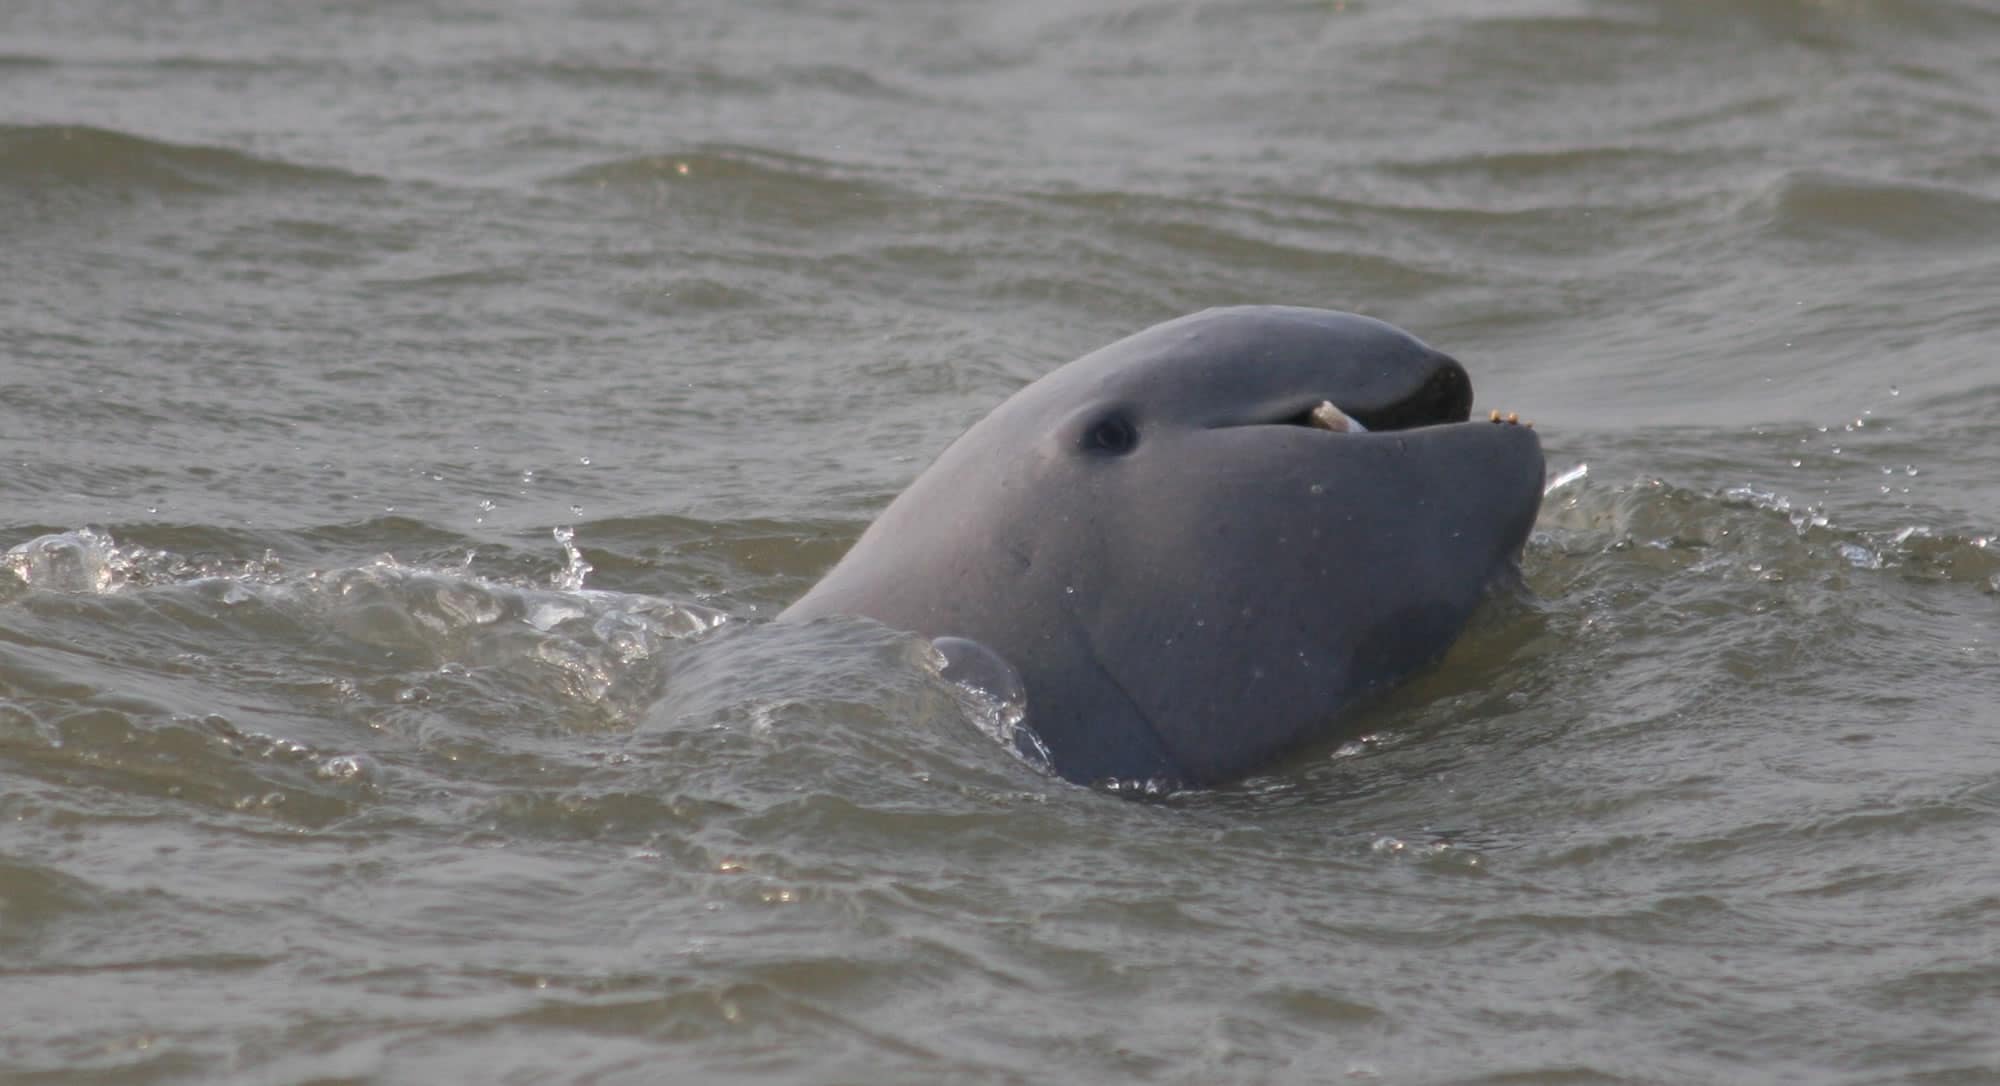 Irrawaddy dolphin - Whale & Dolphin Conservation USA